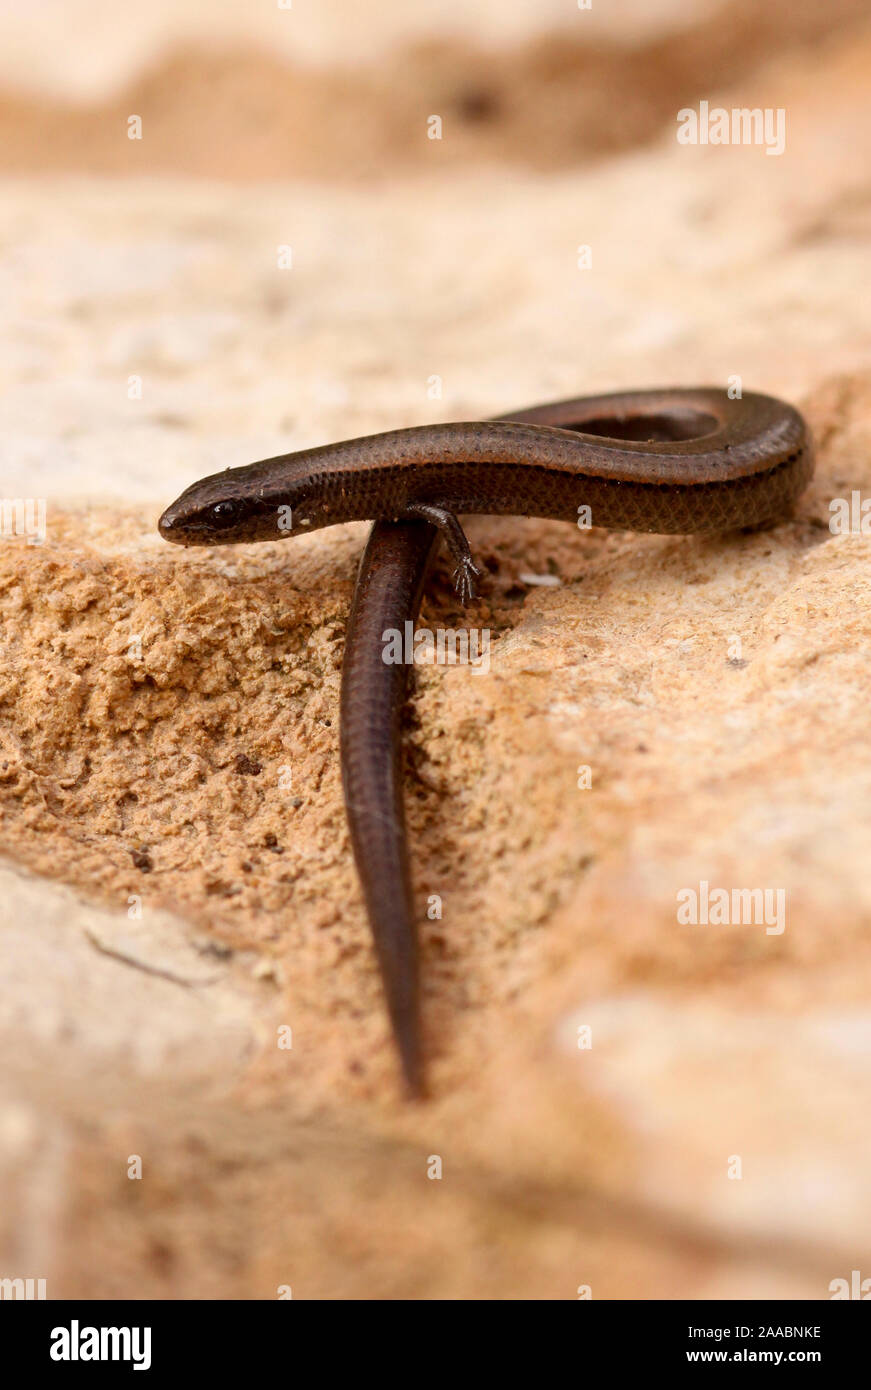 Ablepharus rueppellii, or Rüppell's Snake-eyed Skink is a species of skink found in the Middle East. Photographed in Israel Stock Photo